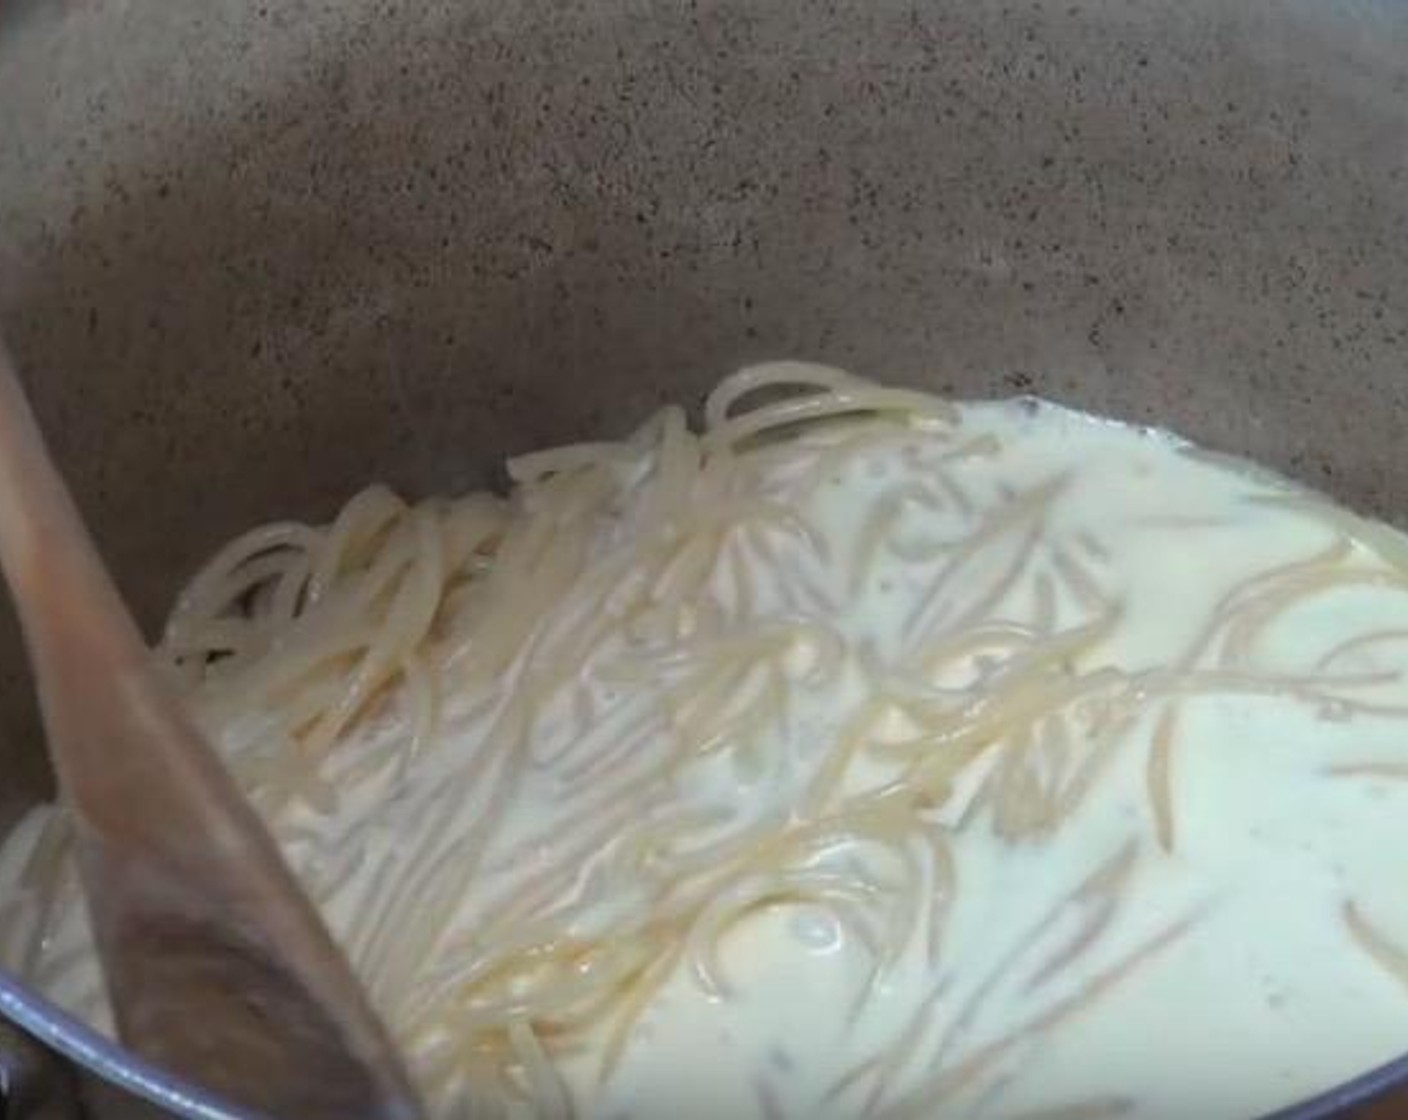 step 4 In the pot with the spaghetti, add Butter (3 Tbsp). Stir until melted, and then add the sauce. Mix until pasta is coated and sauce starts to thicken.